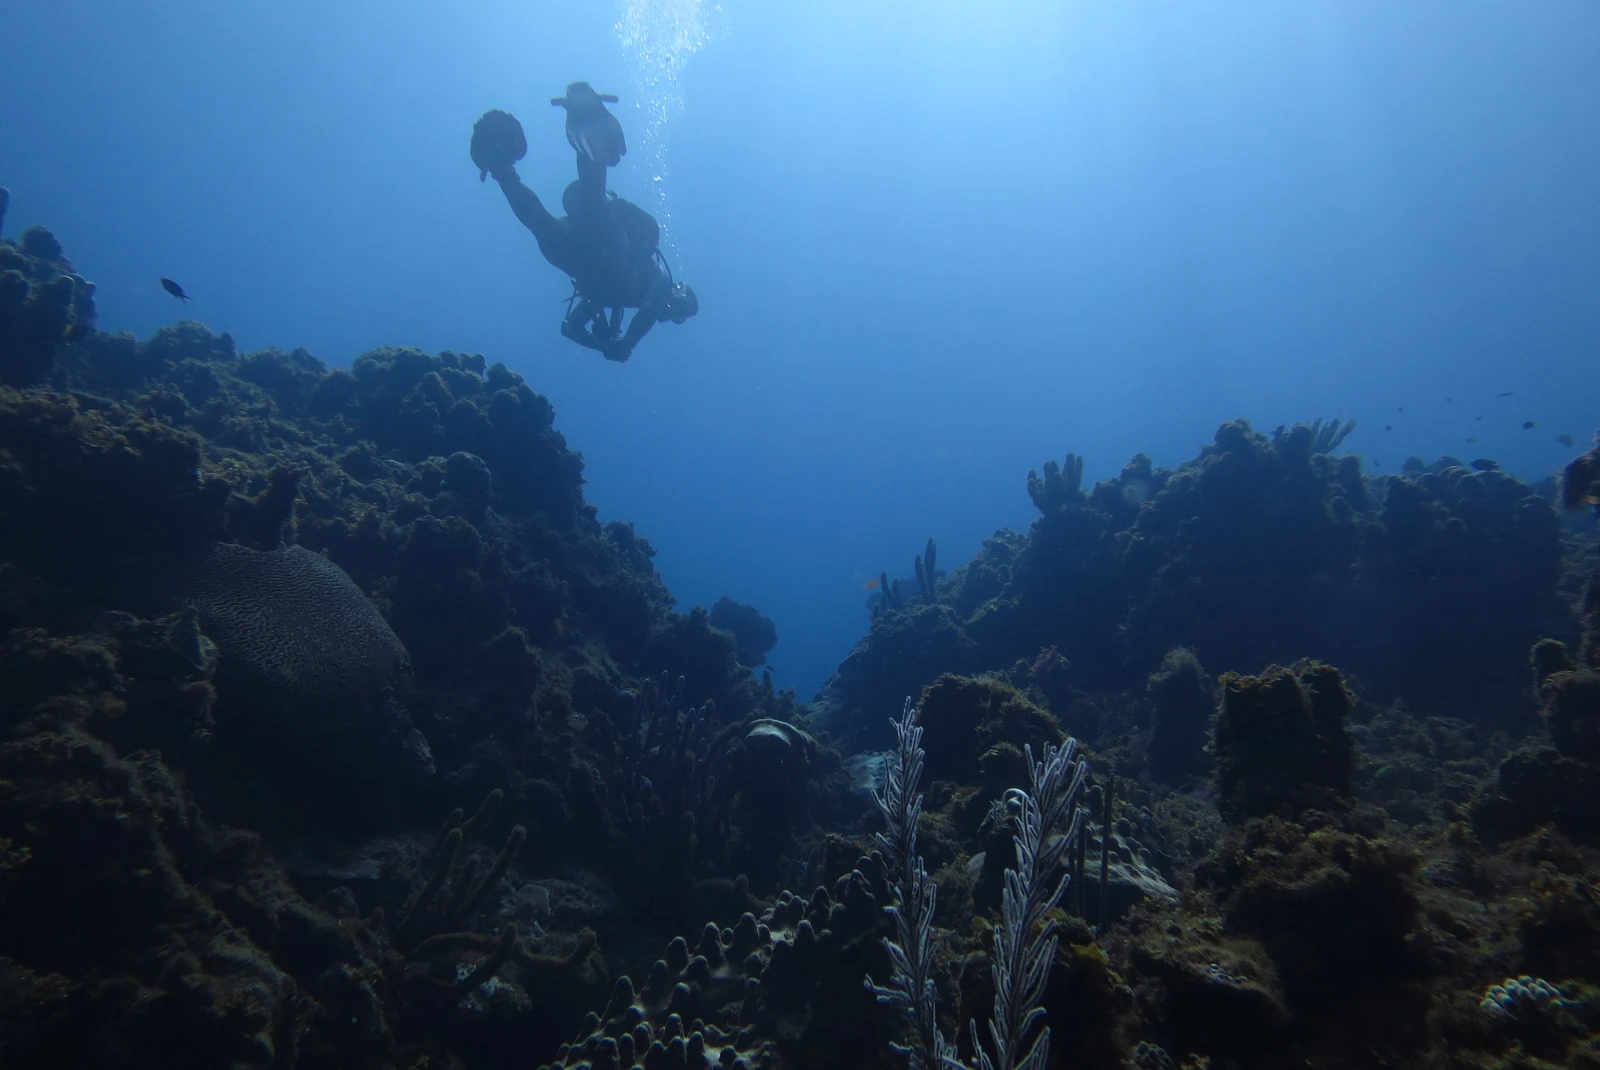 A diver in the distance under deep blue water with white bubbles coming from mask and large flippers with a dark coral reef 